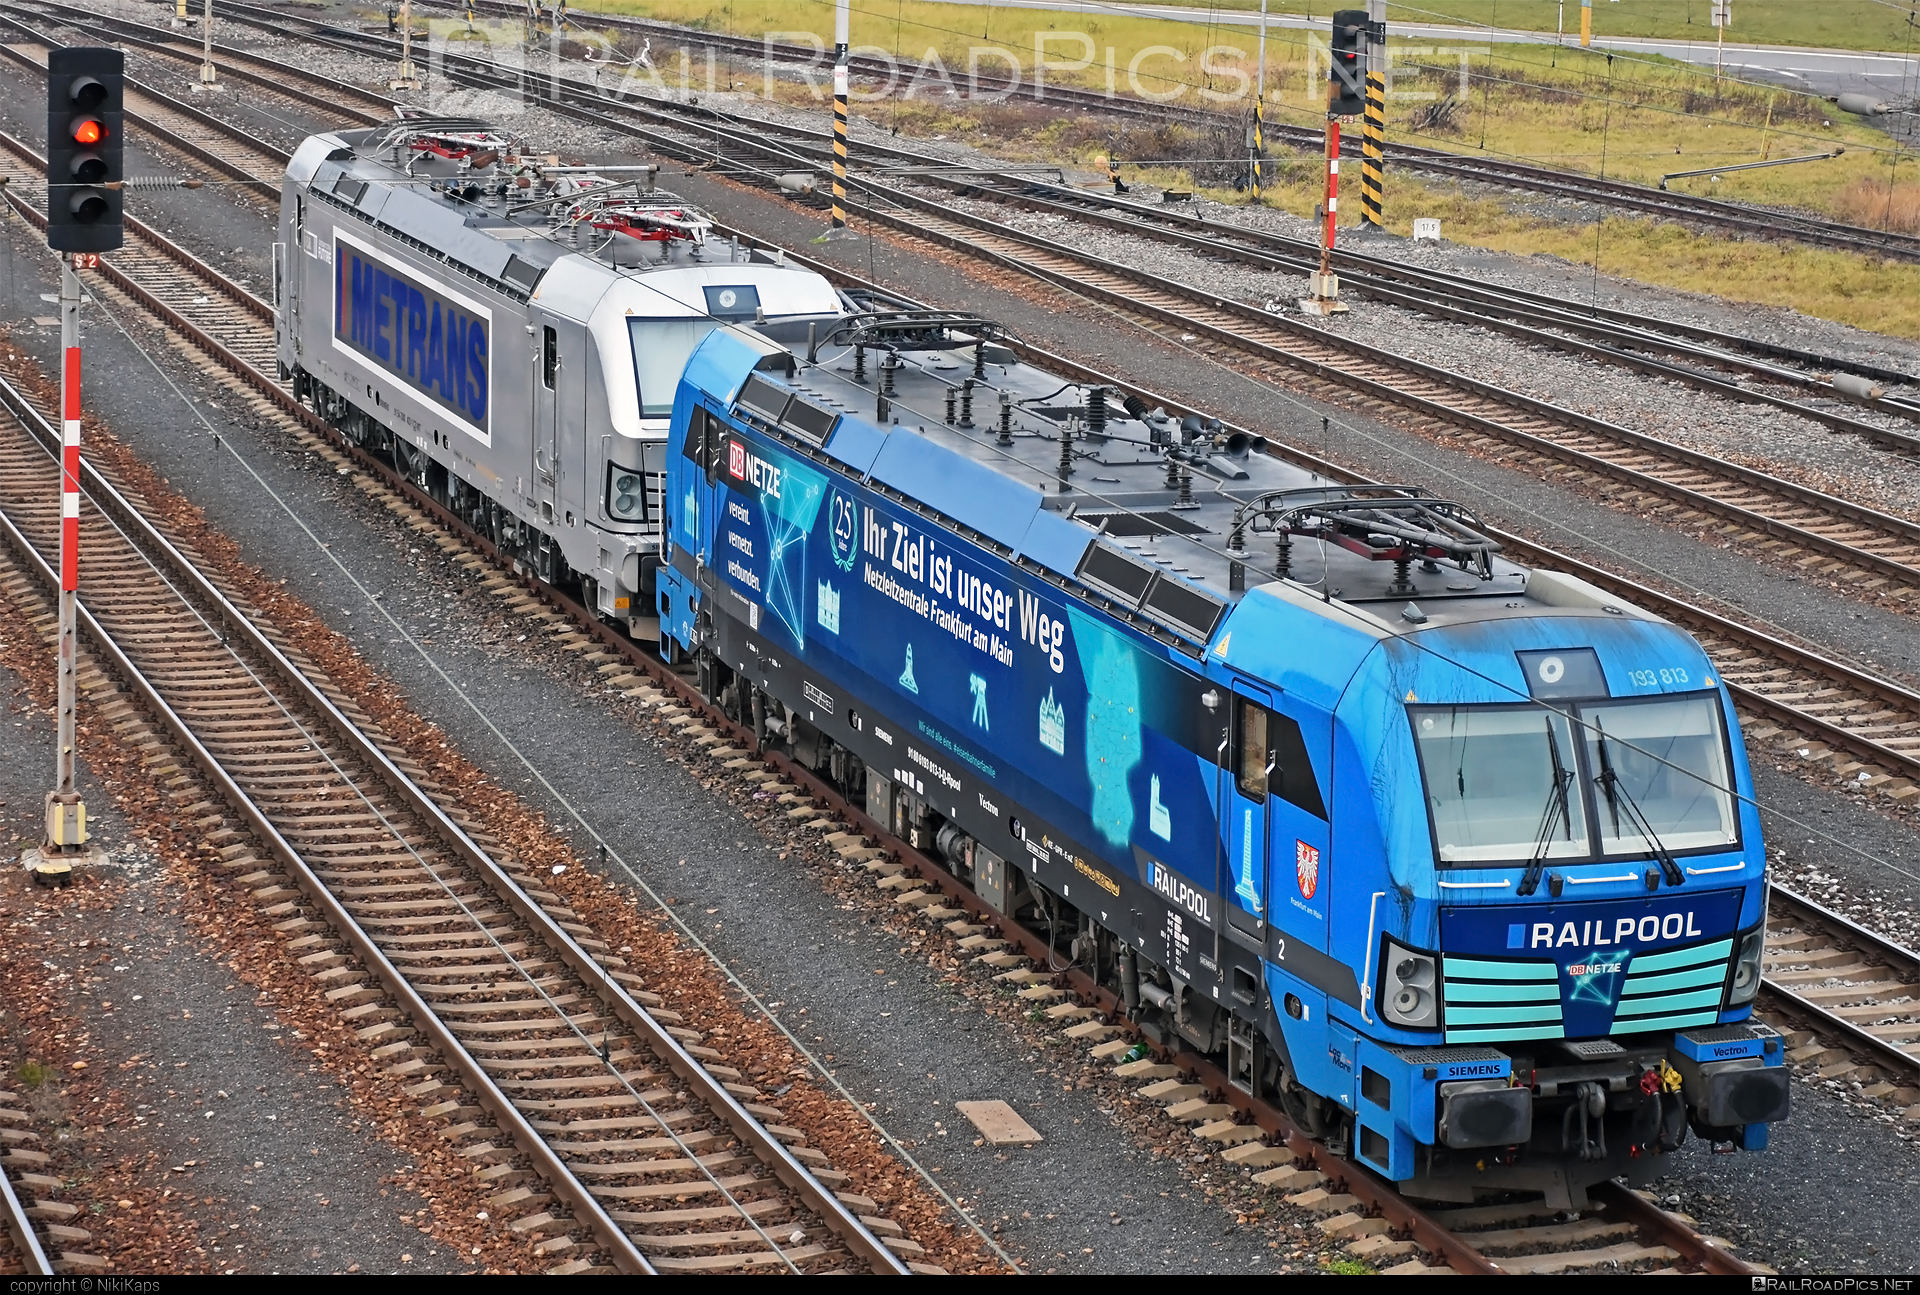 Siemens Vectron AC - 193 813 operated by Retrack GmbH & Co. KG #dbnetze #railpool #railpoolgmbh #retrack #retrackgmbh #siemens #siemensVectron #siemensVectronAC #vectron #vectronAC